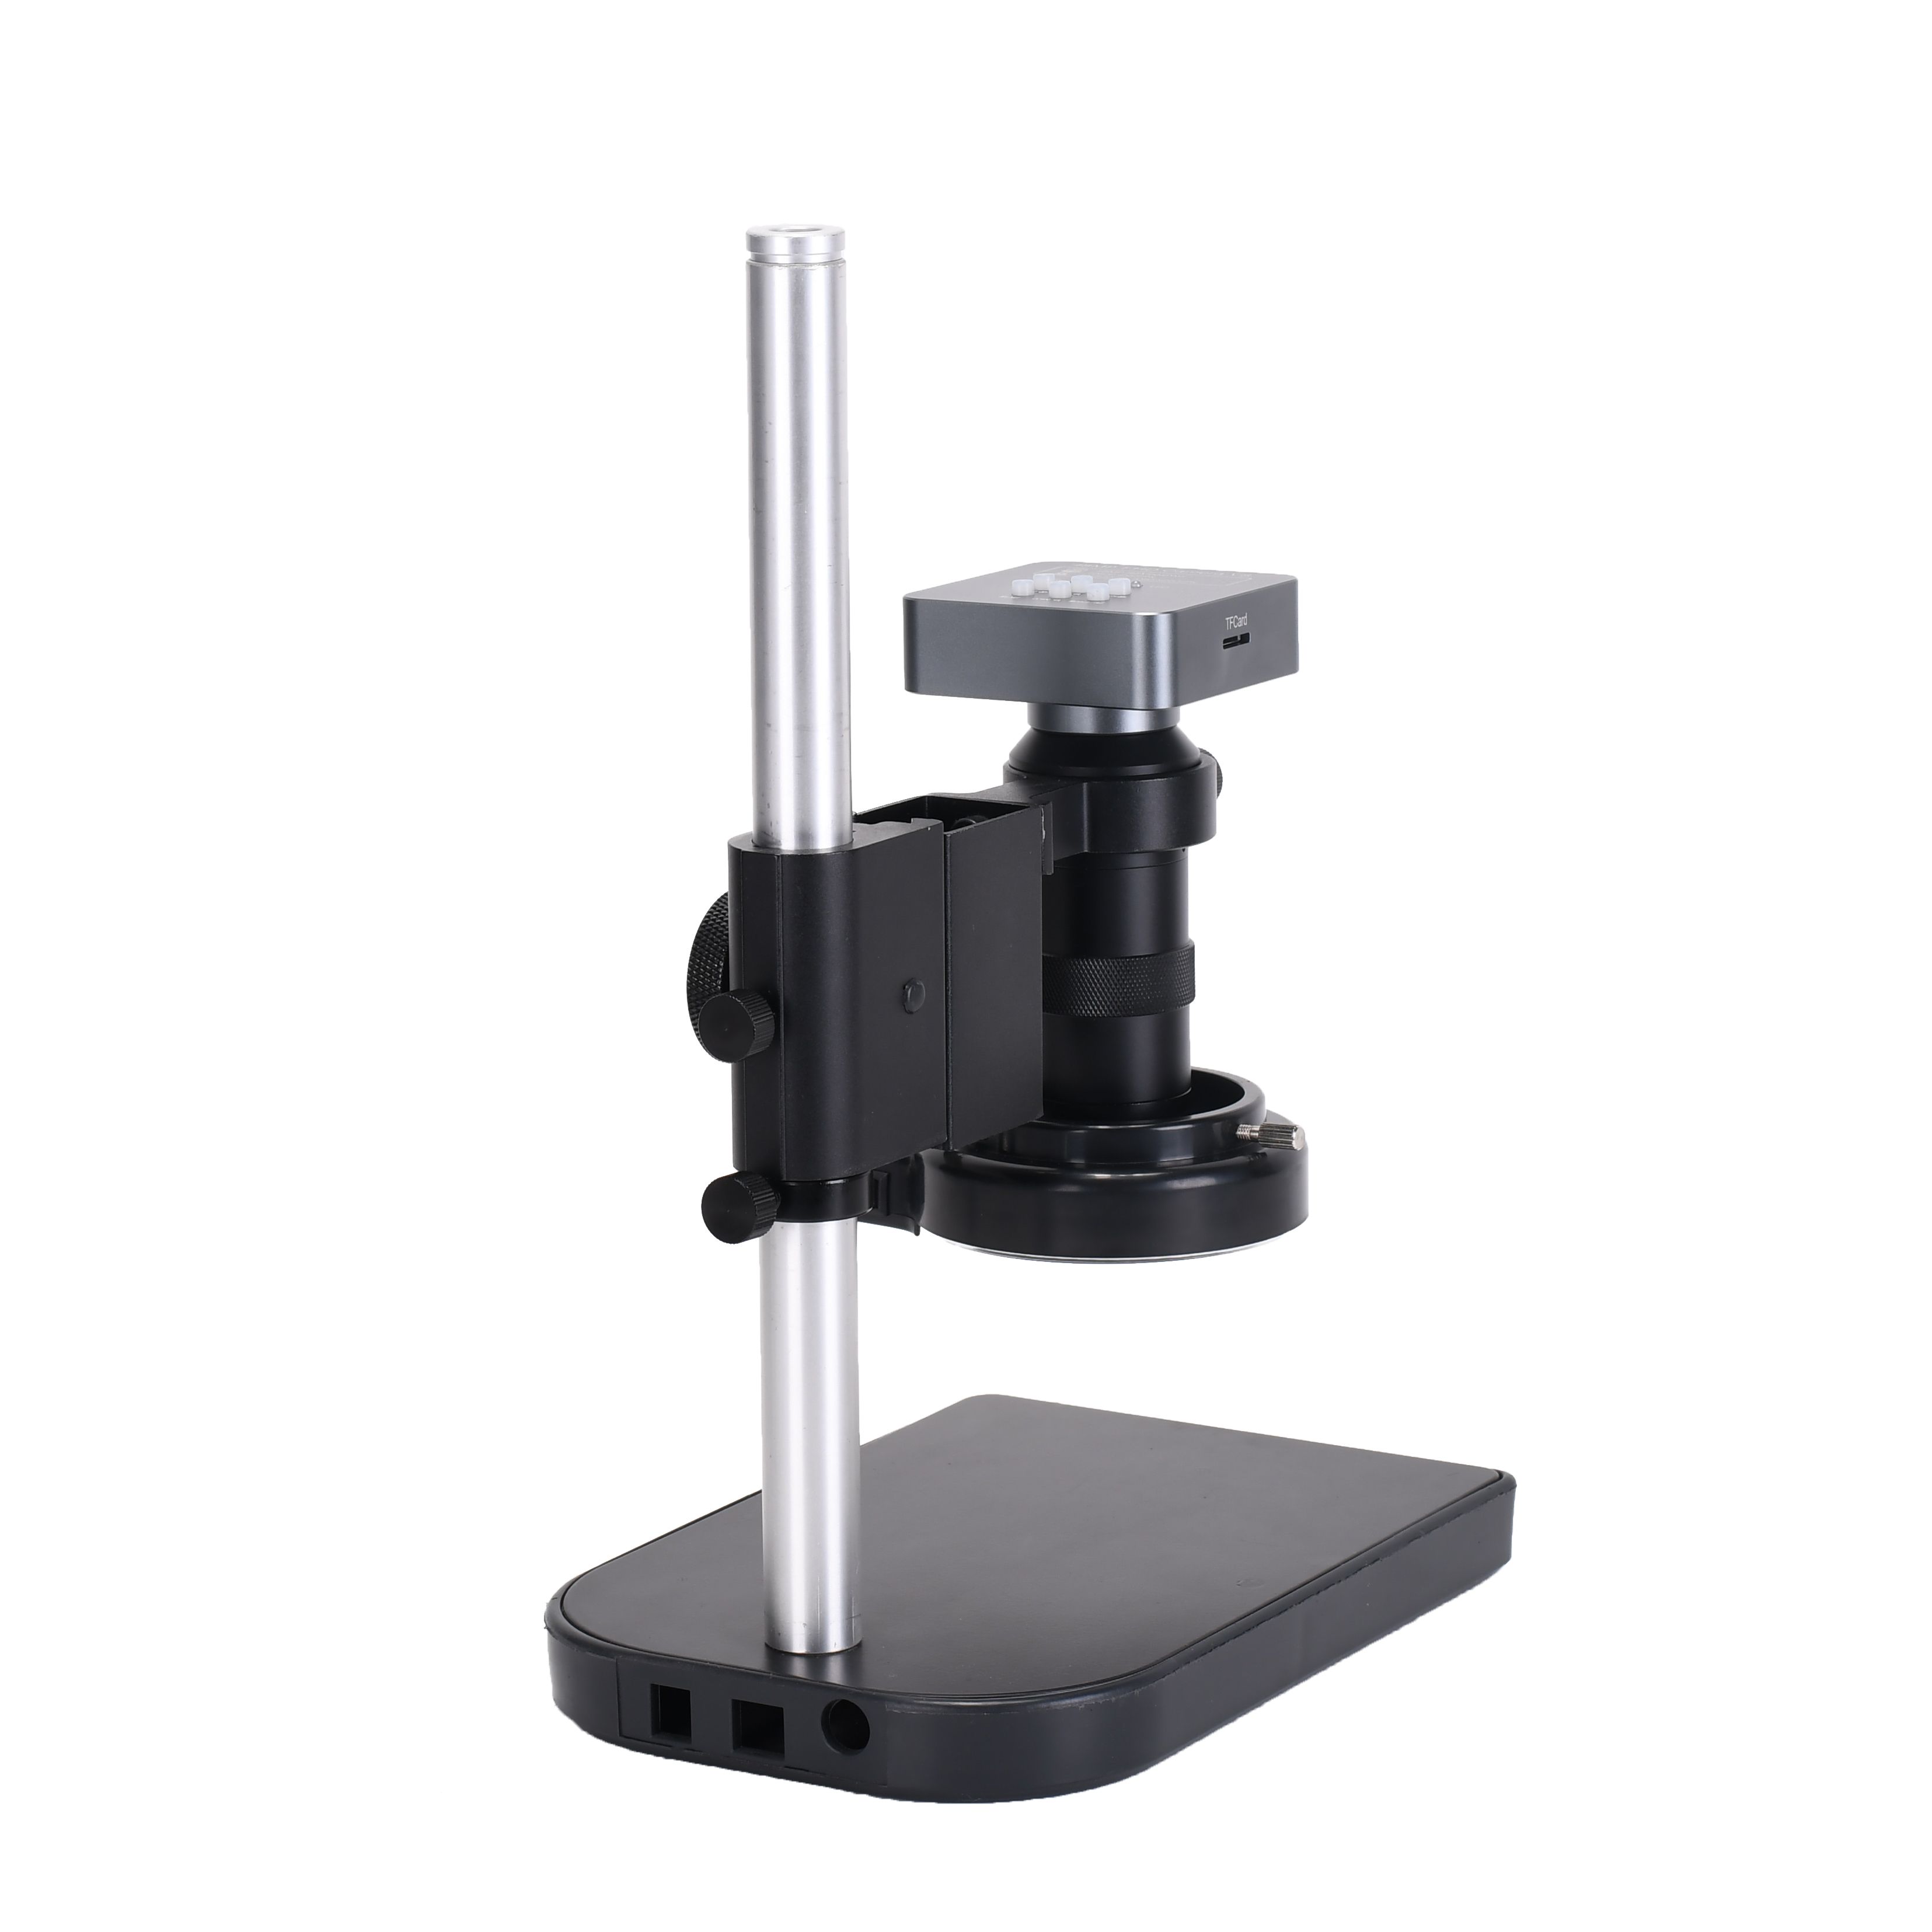 48MP-2K-Industrial-Microscope-Camera-HDMI-USB-Outputs-130X-C-mount-Lens-56-LED-Light--Boom-for-PCB-R-1722761